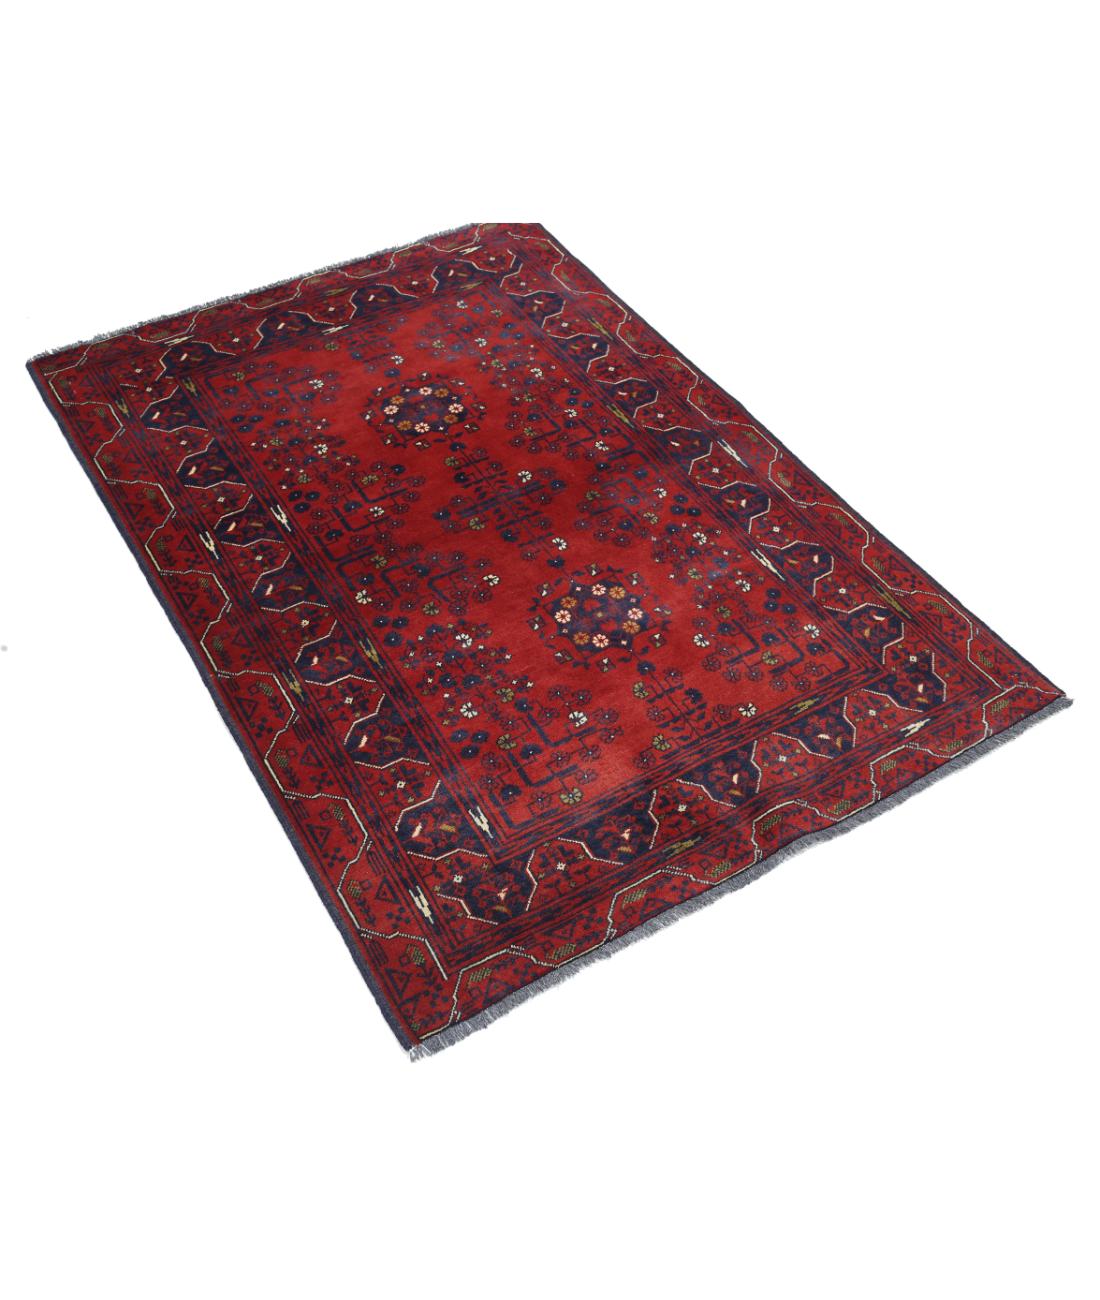 Afghan 3' 2" X 4' 9" Hand-Knotted Wool Rug 3' 2" X 4' 9" (97 X 145) / Red / Blue